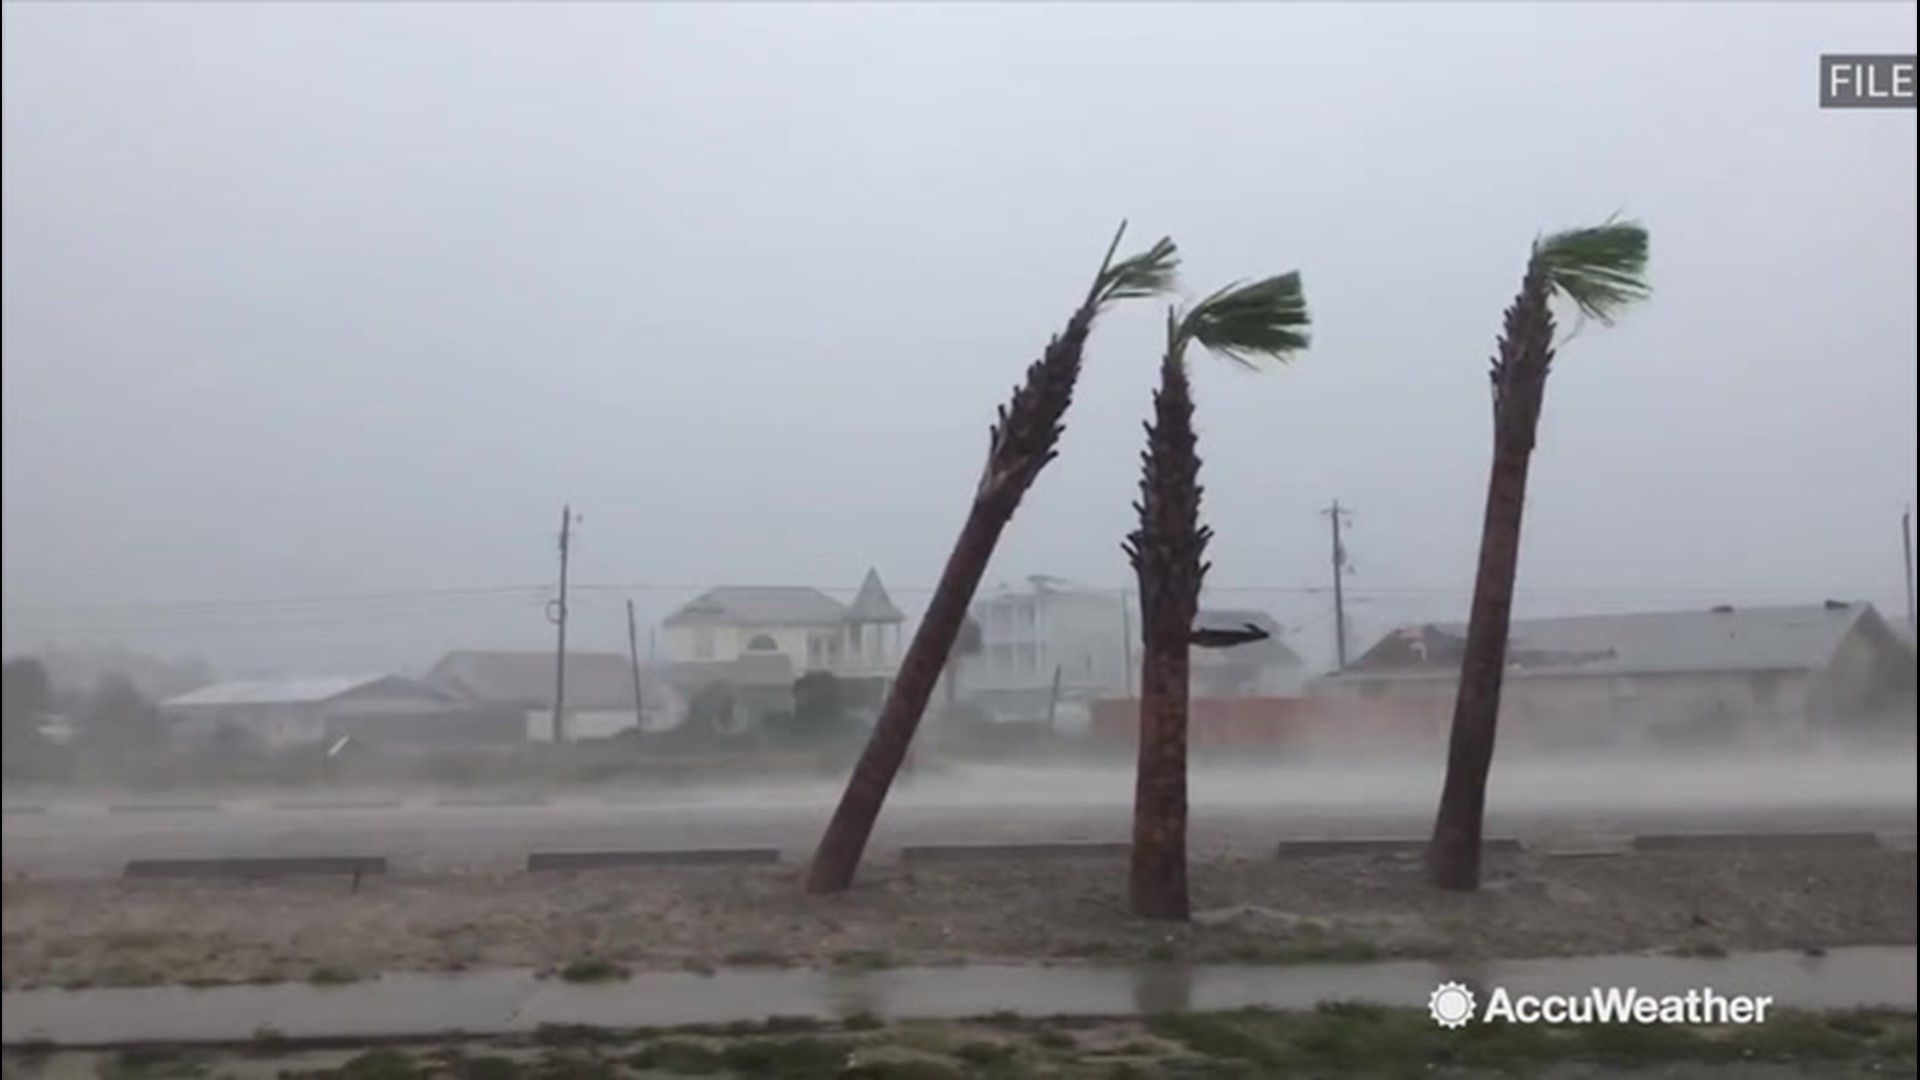 Just because a full year has passed does not mean the recovery efforts in northwest Florida have ceased. AccuWeather Meteorologist Lauren Rainson updates us on where some volunteer efforts are today.